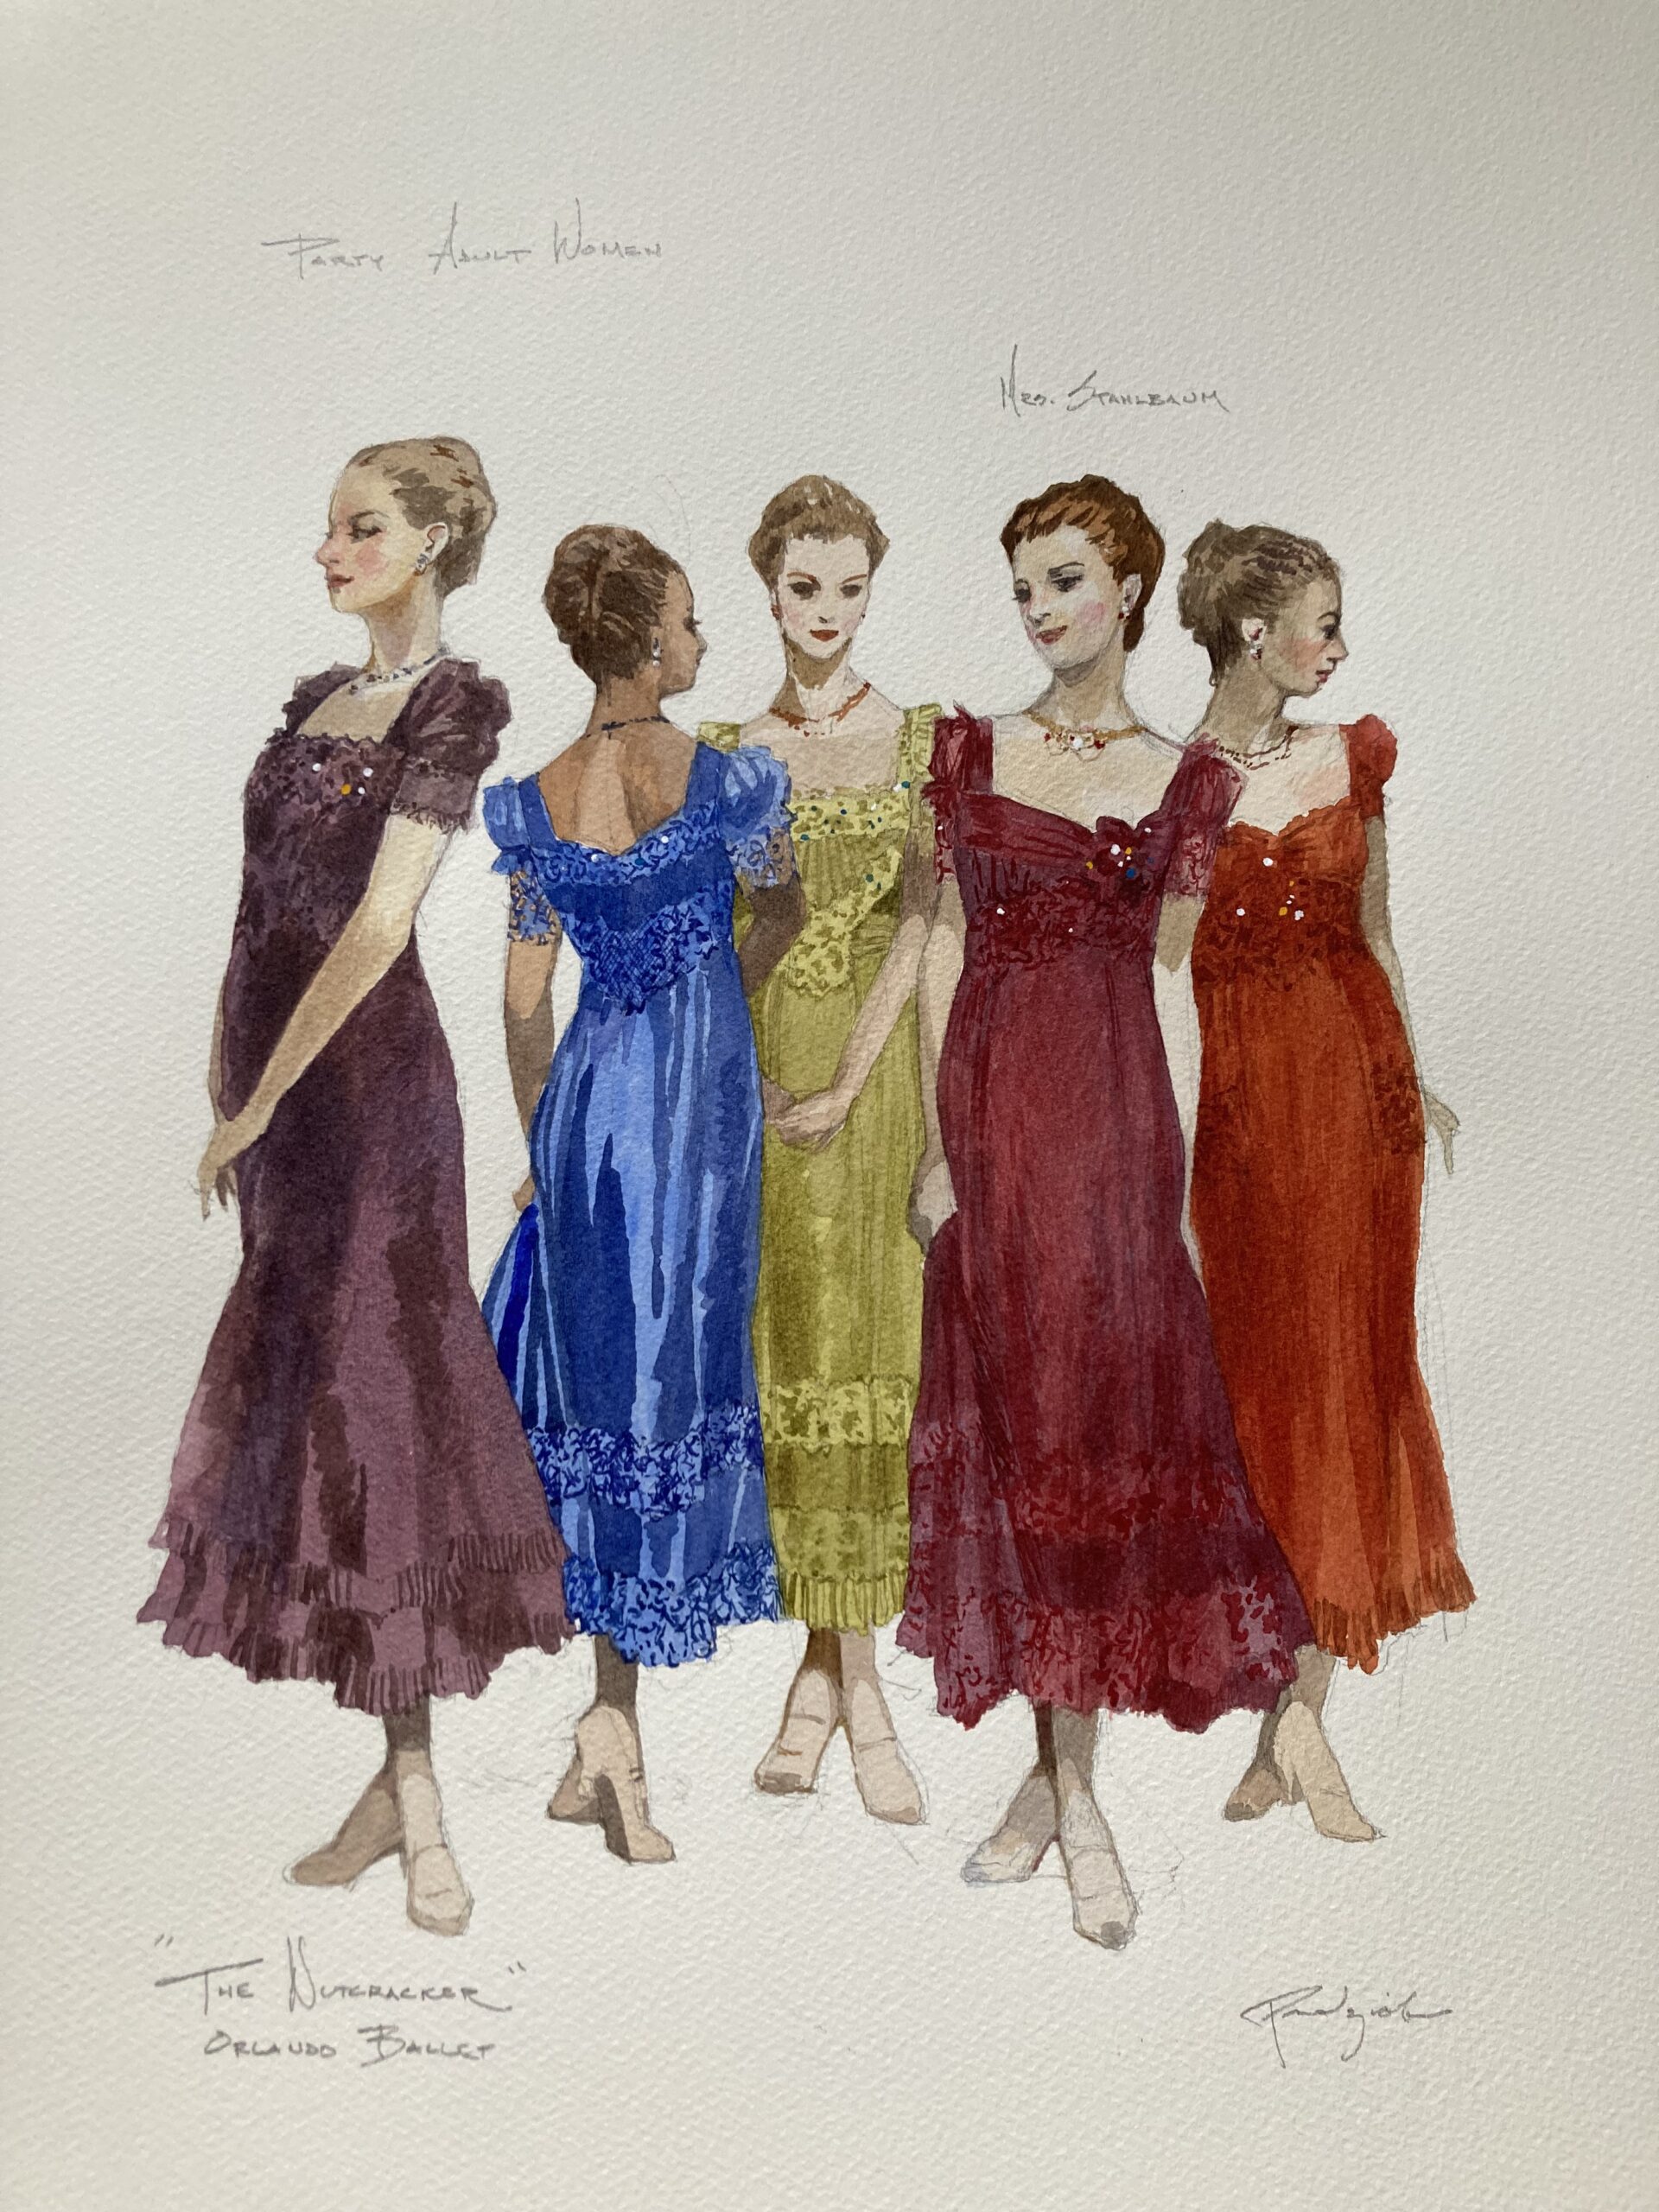 A sketch on paper in pen and watercolor shows for the design for new Party Scene women's costumes.